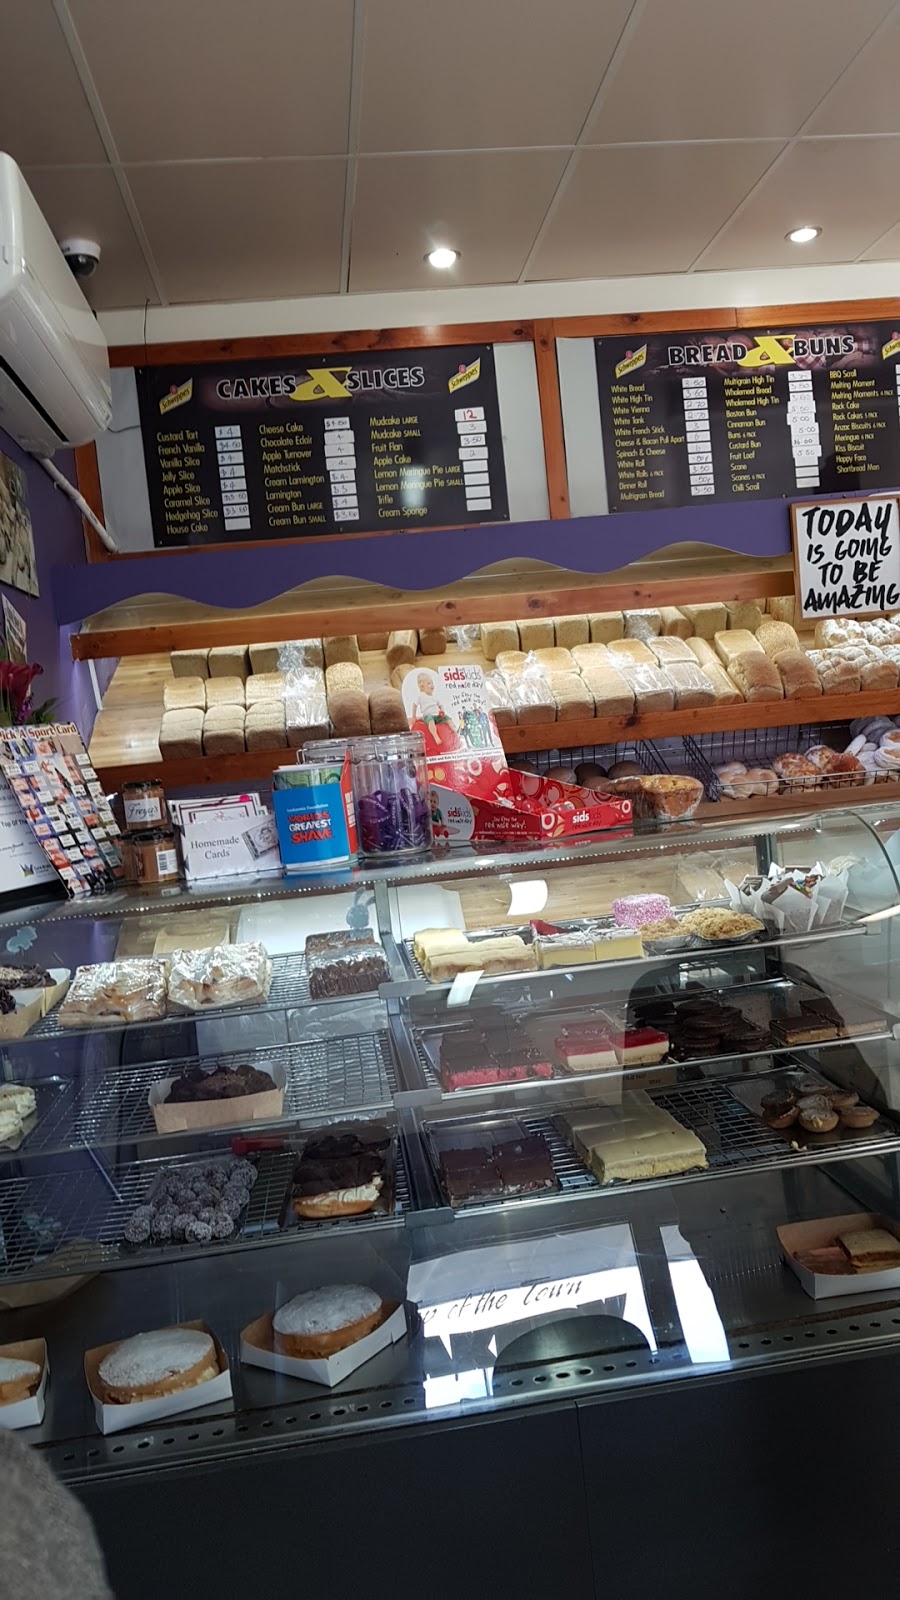 Top Of The Town Bakery | cafe | 9 High St, New Norfolk TAS 7140, Australia | 0362615552 OR +61 3 6261 5552